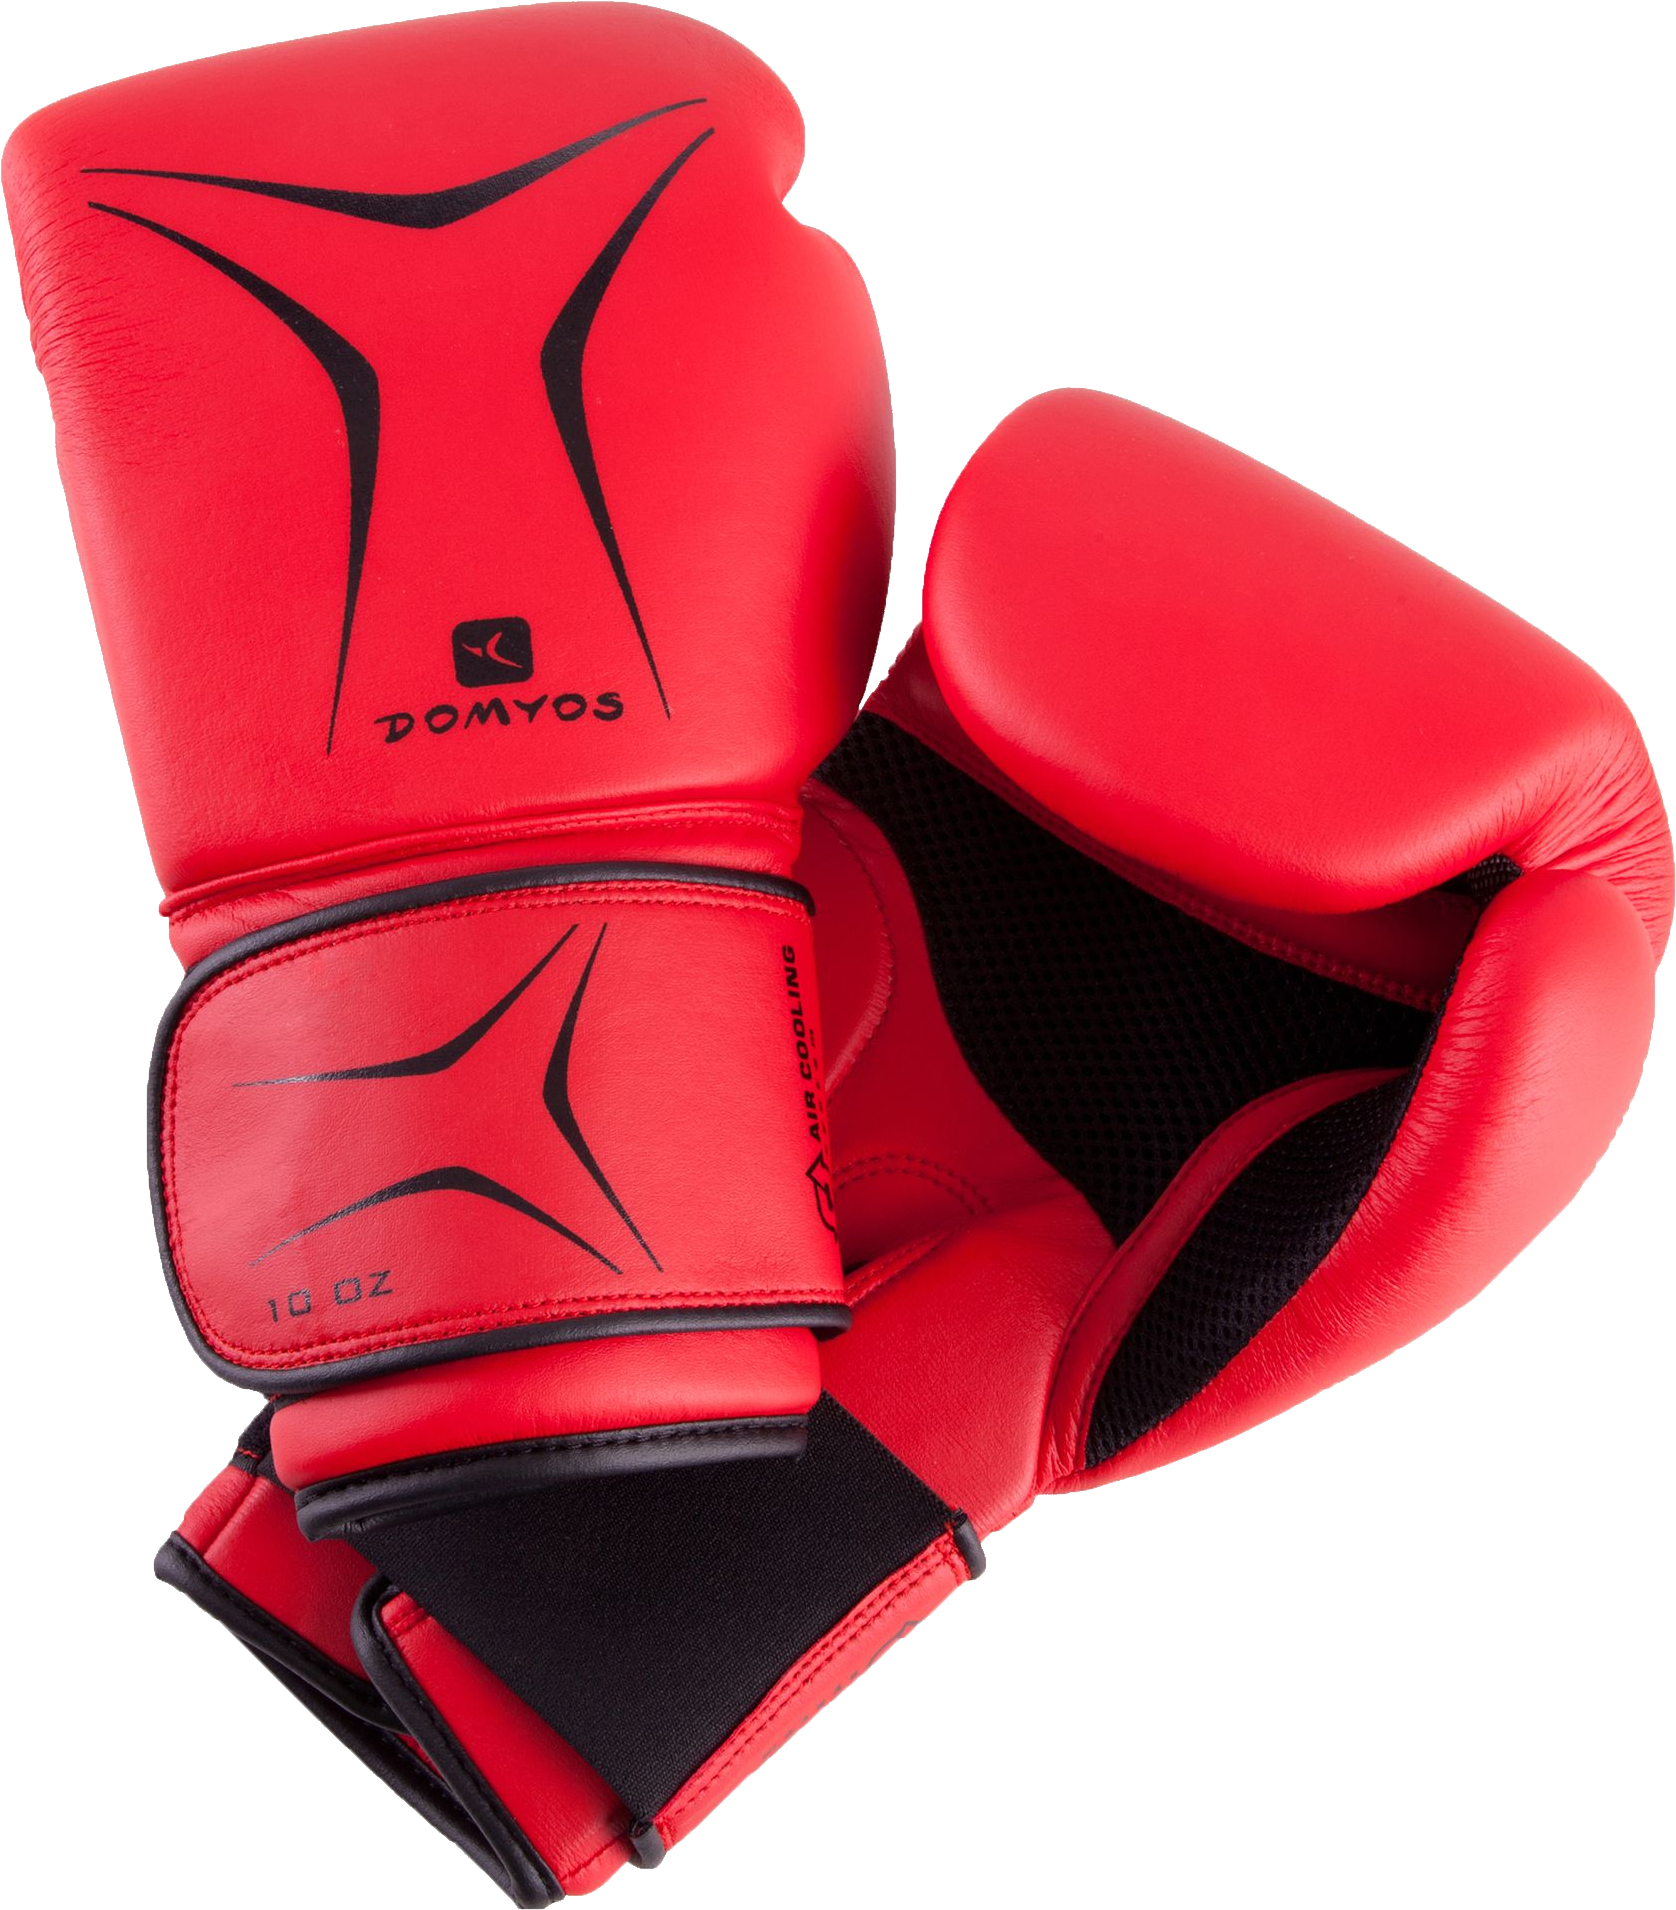 Boxing Gloves Png Image - Decathlon Domyos Fkt 180 Beginners' Boxing Gloves - (1676x1910)